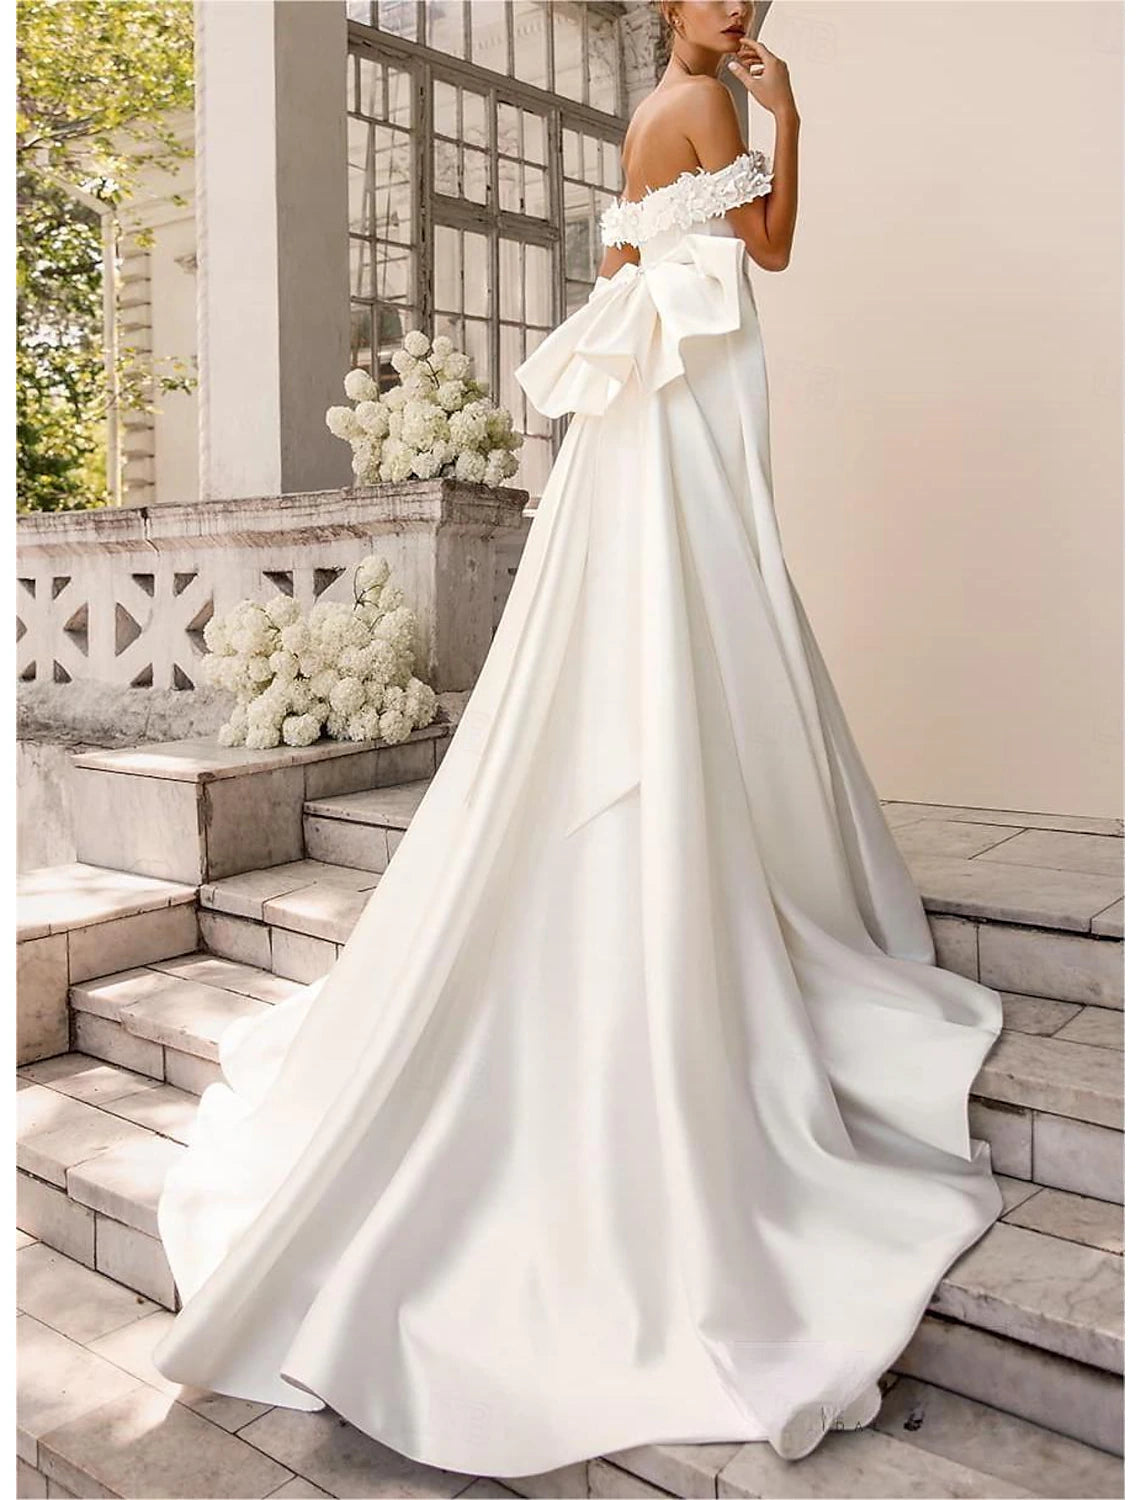 Beach Formal Wedding Dresses Two Piece Square Neck Sleeveless Sweep / Brush Train Taffeta Bridal Gowns With Bow(s) Solid Color